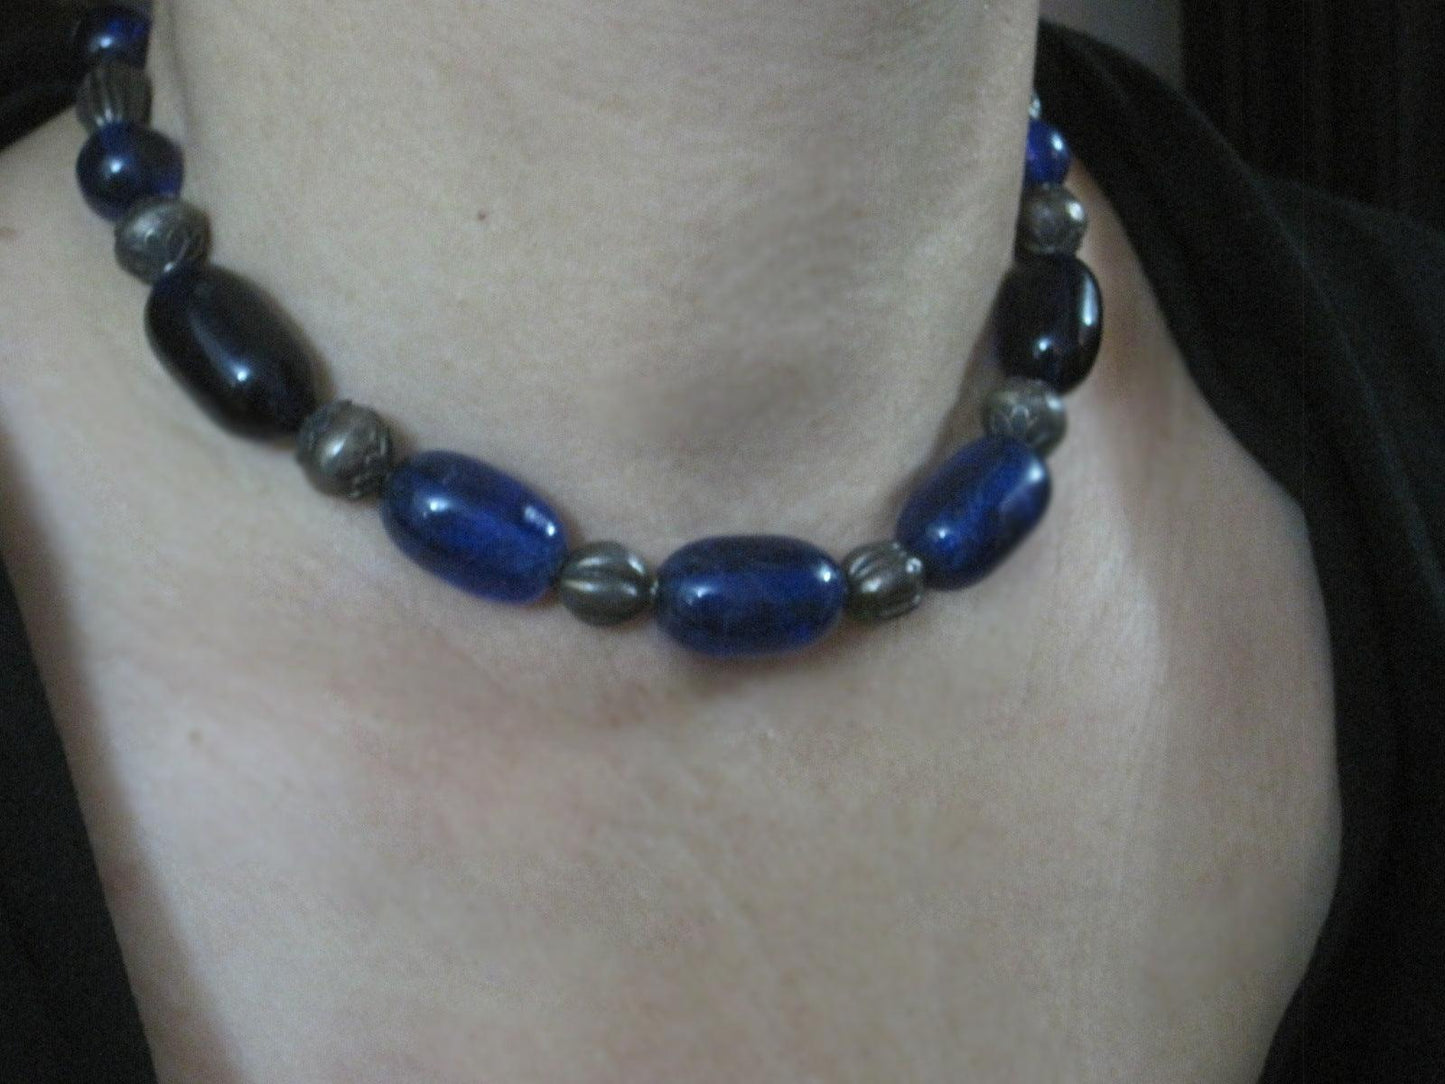 Vintage Necklace with Silver and Blue Glass Beads - Anteeka